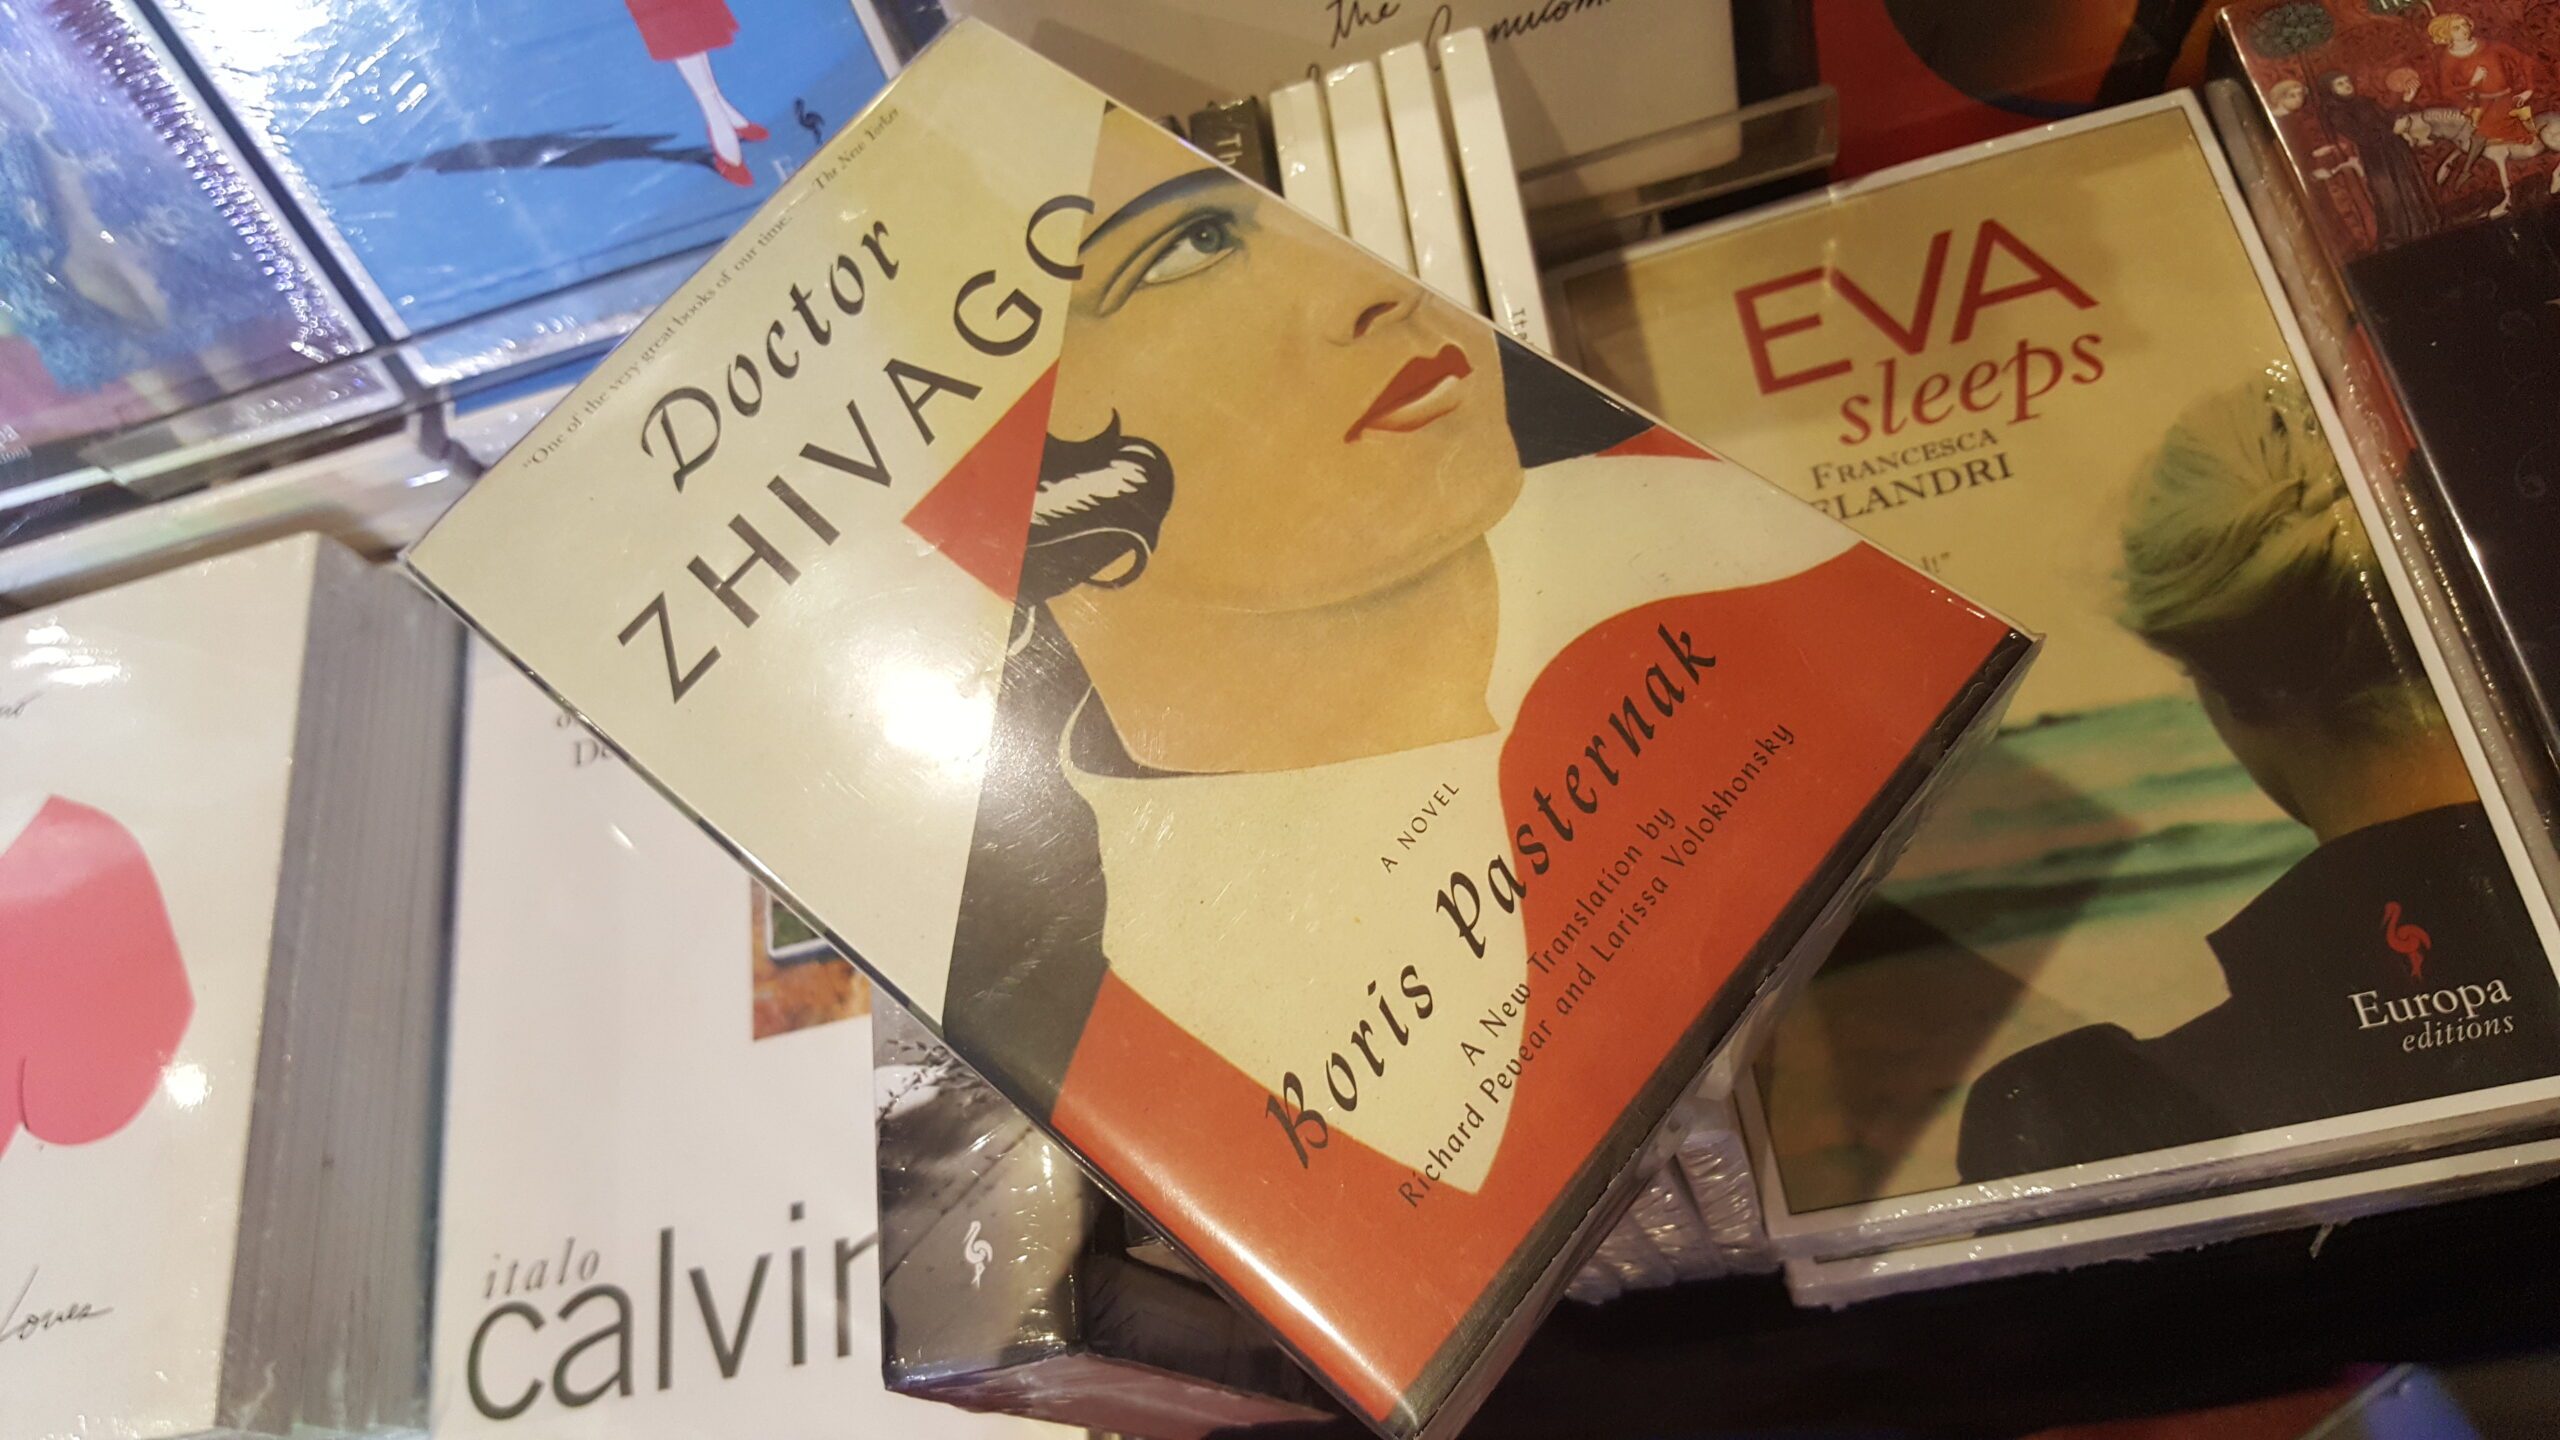 Coming soon: More European literature translated into PH languages